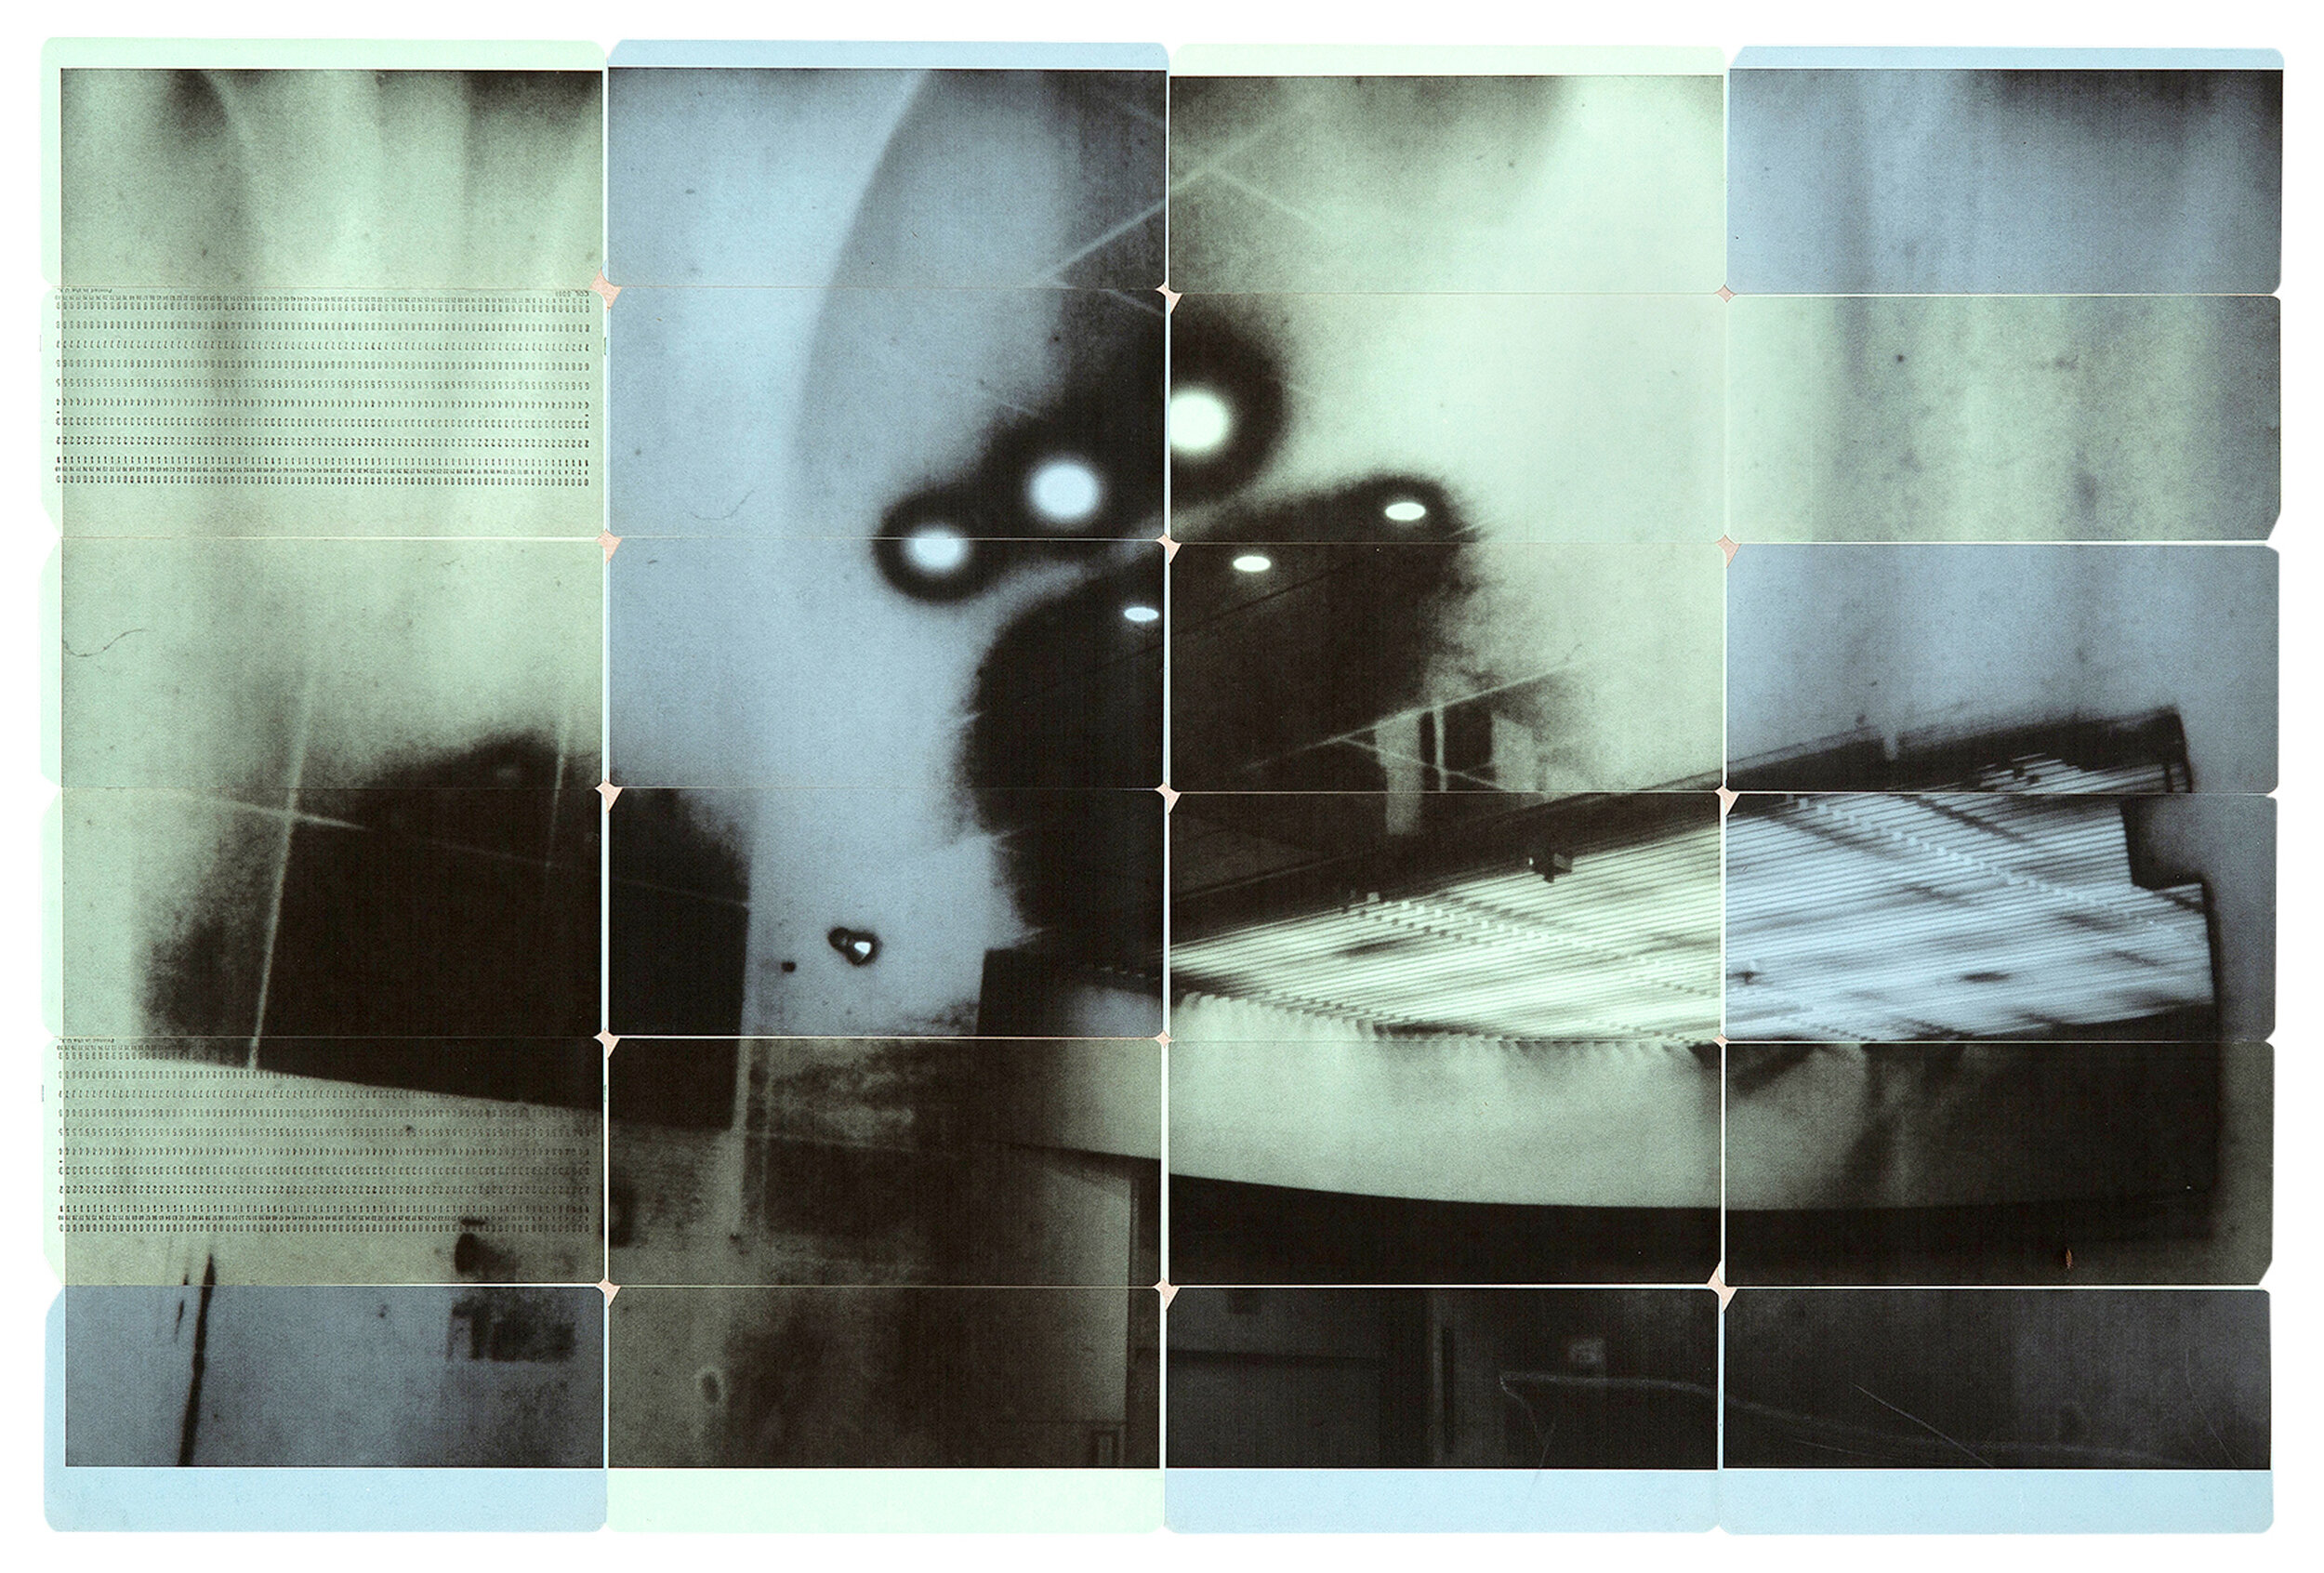 OSC_38, 2016 Inkjet on 24 green and blue computer punch cards Negative date 2015 49.7 x 74.7 cm.jpg